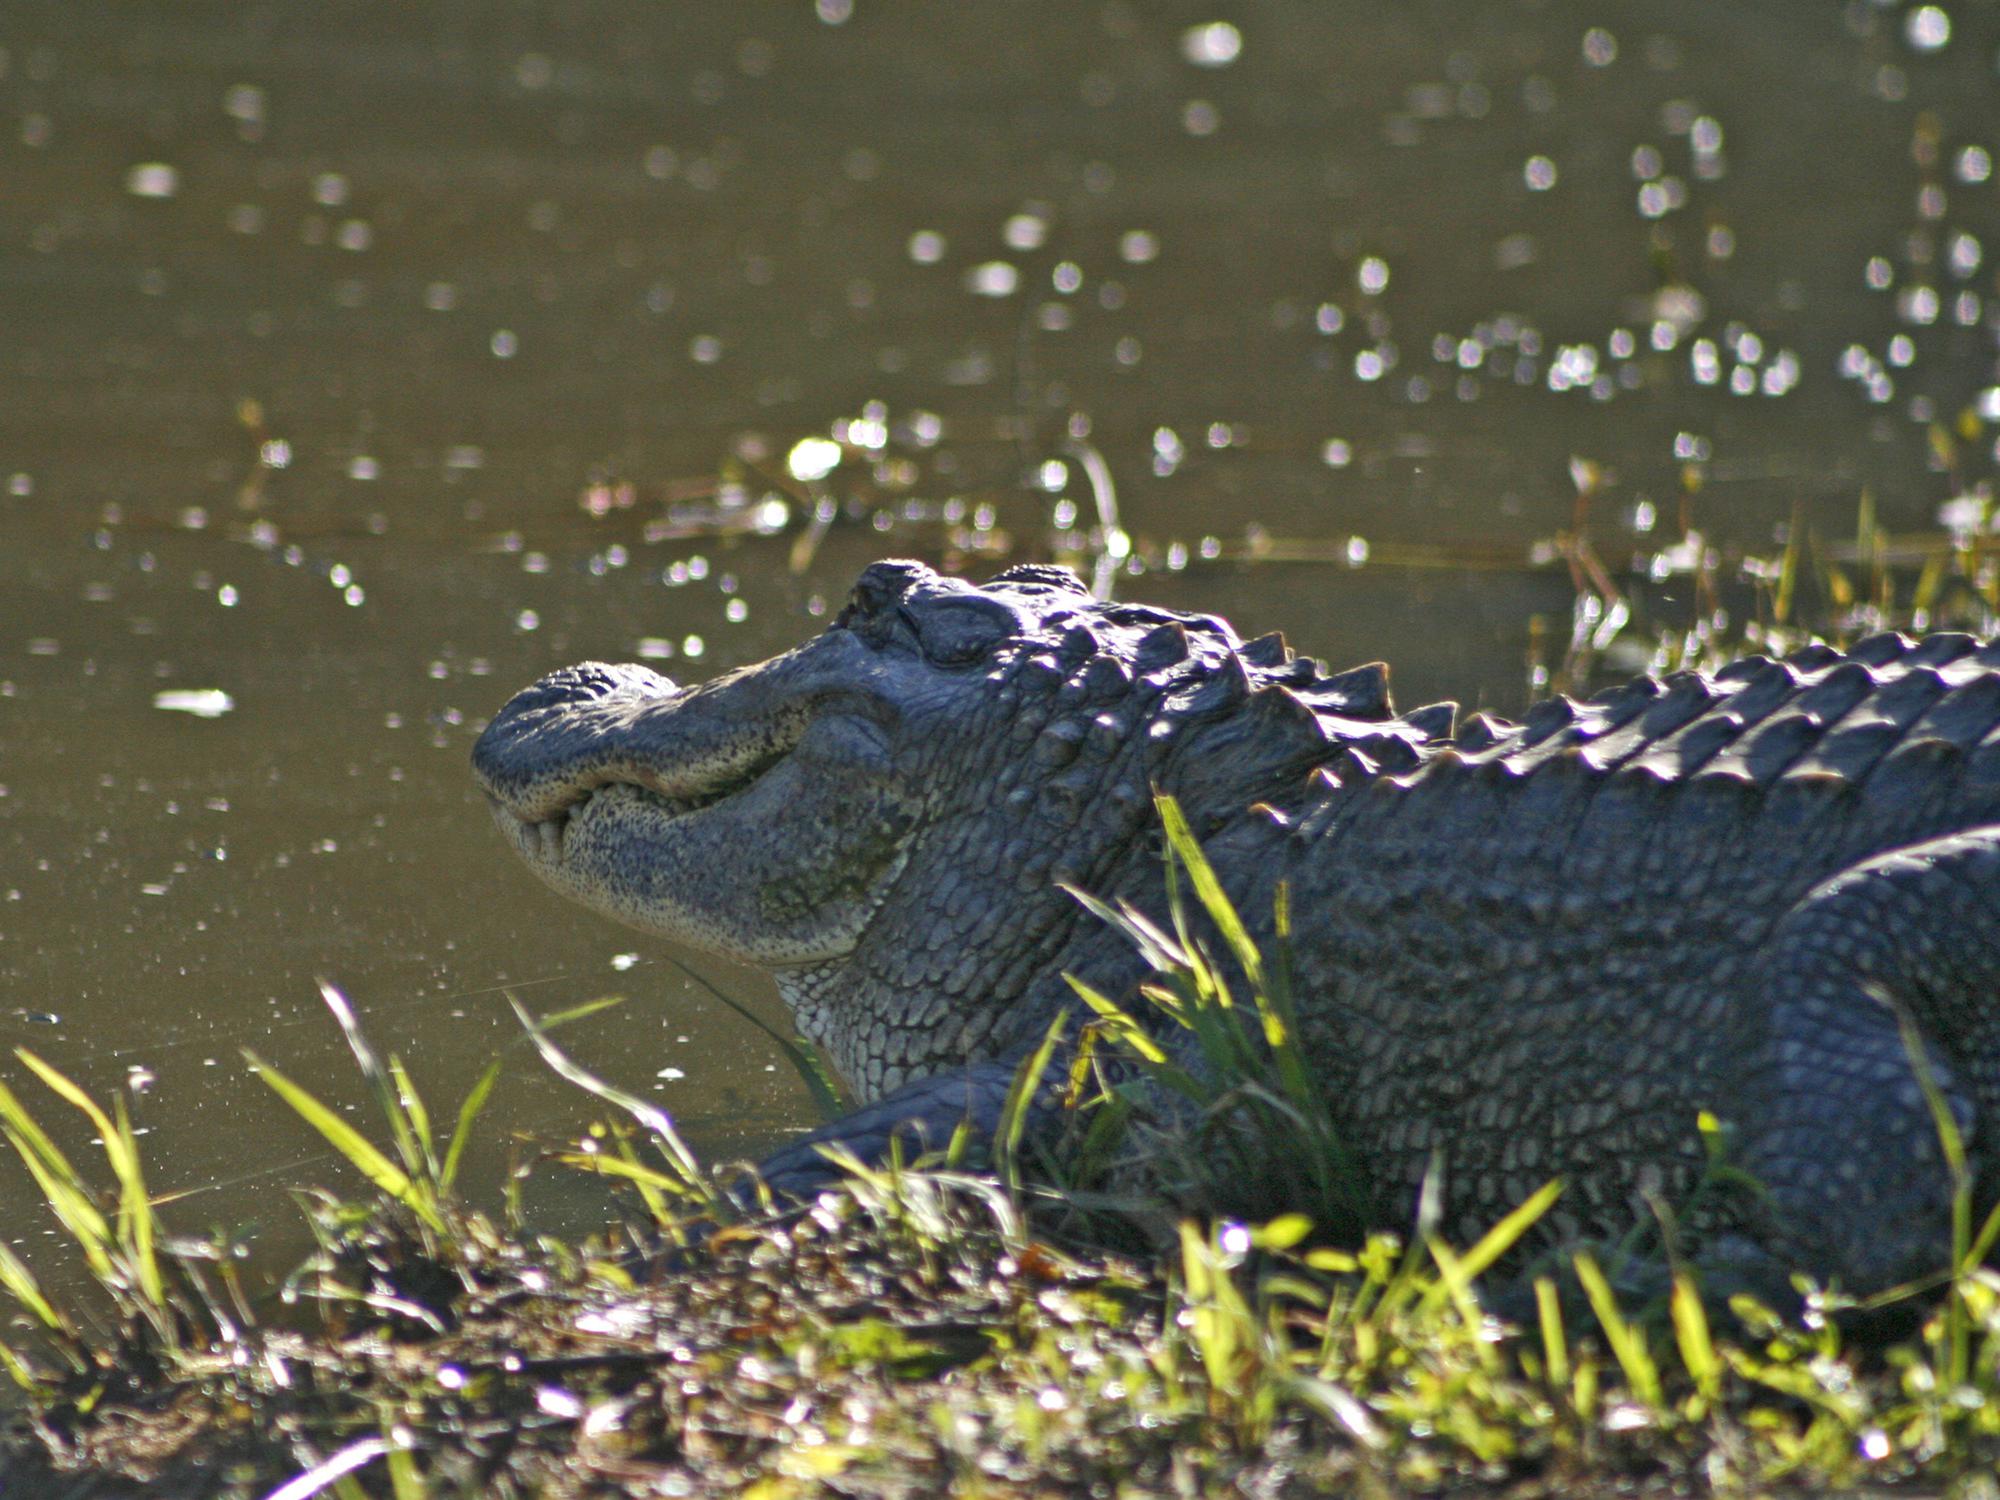 Alligators are protected by Mississippi law, so consult wildlife officials for guidance in removing these unwanted visitors from ponds and lakes. (File photo by MSU Extension Service/Kat Lawrence)